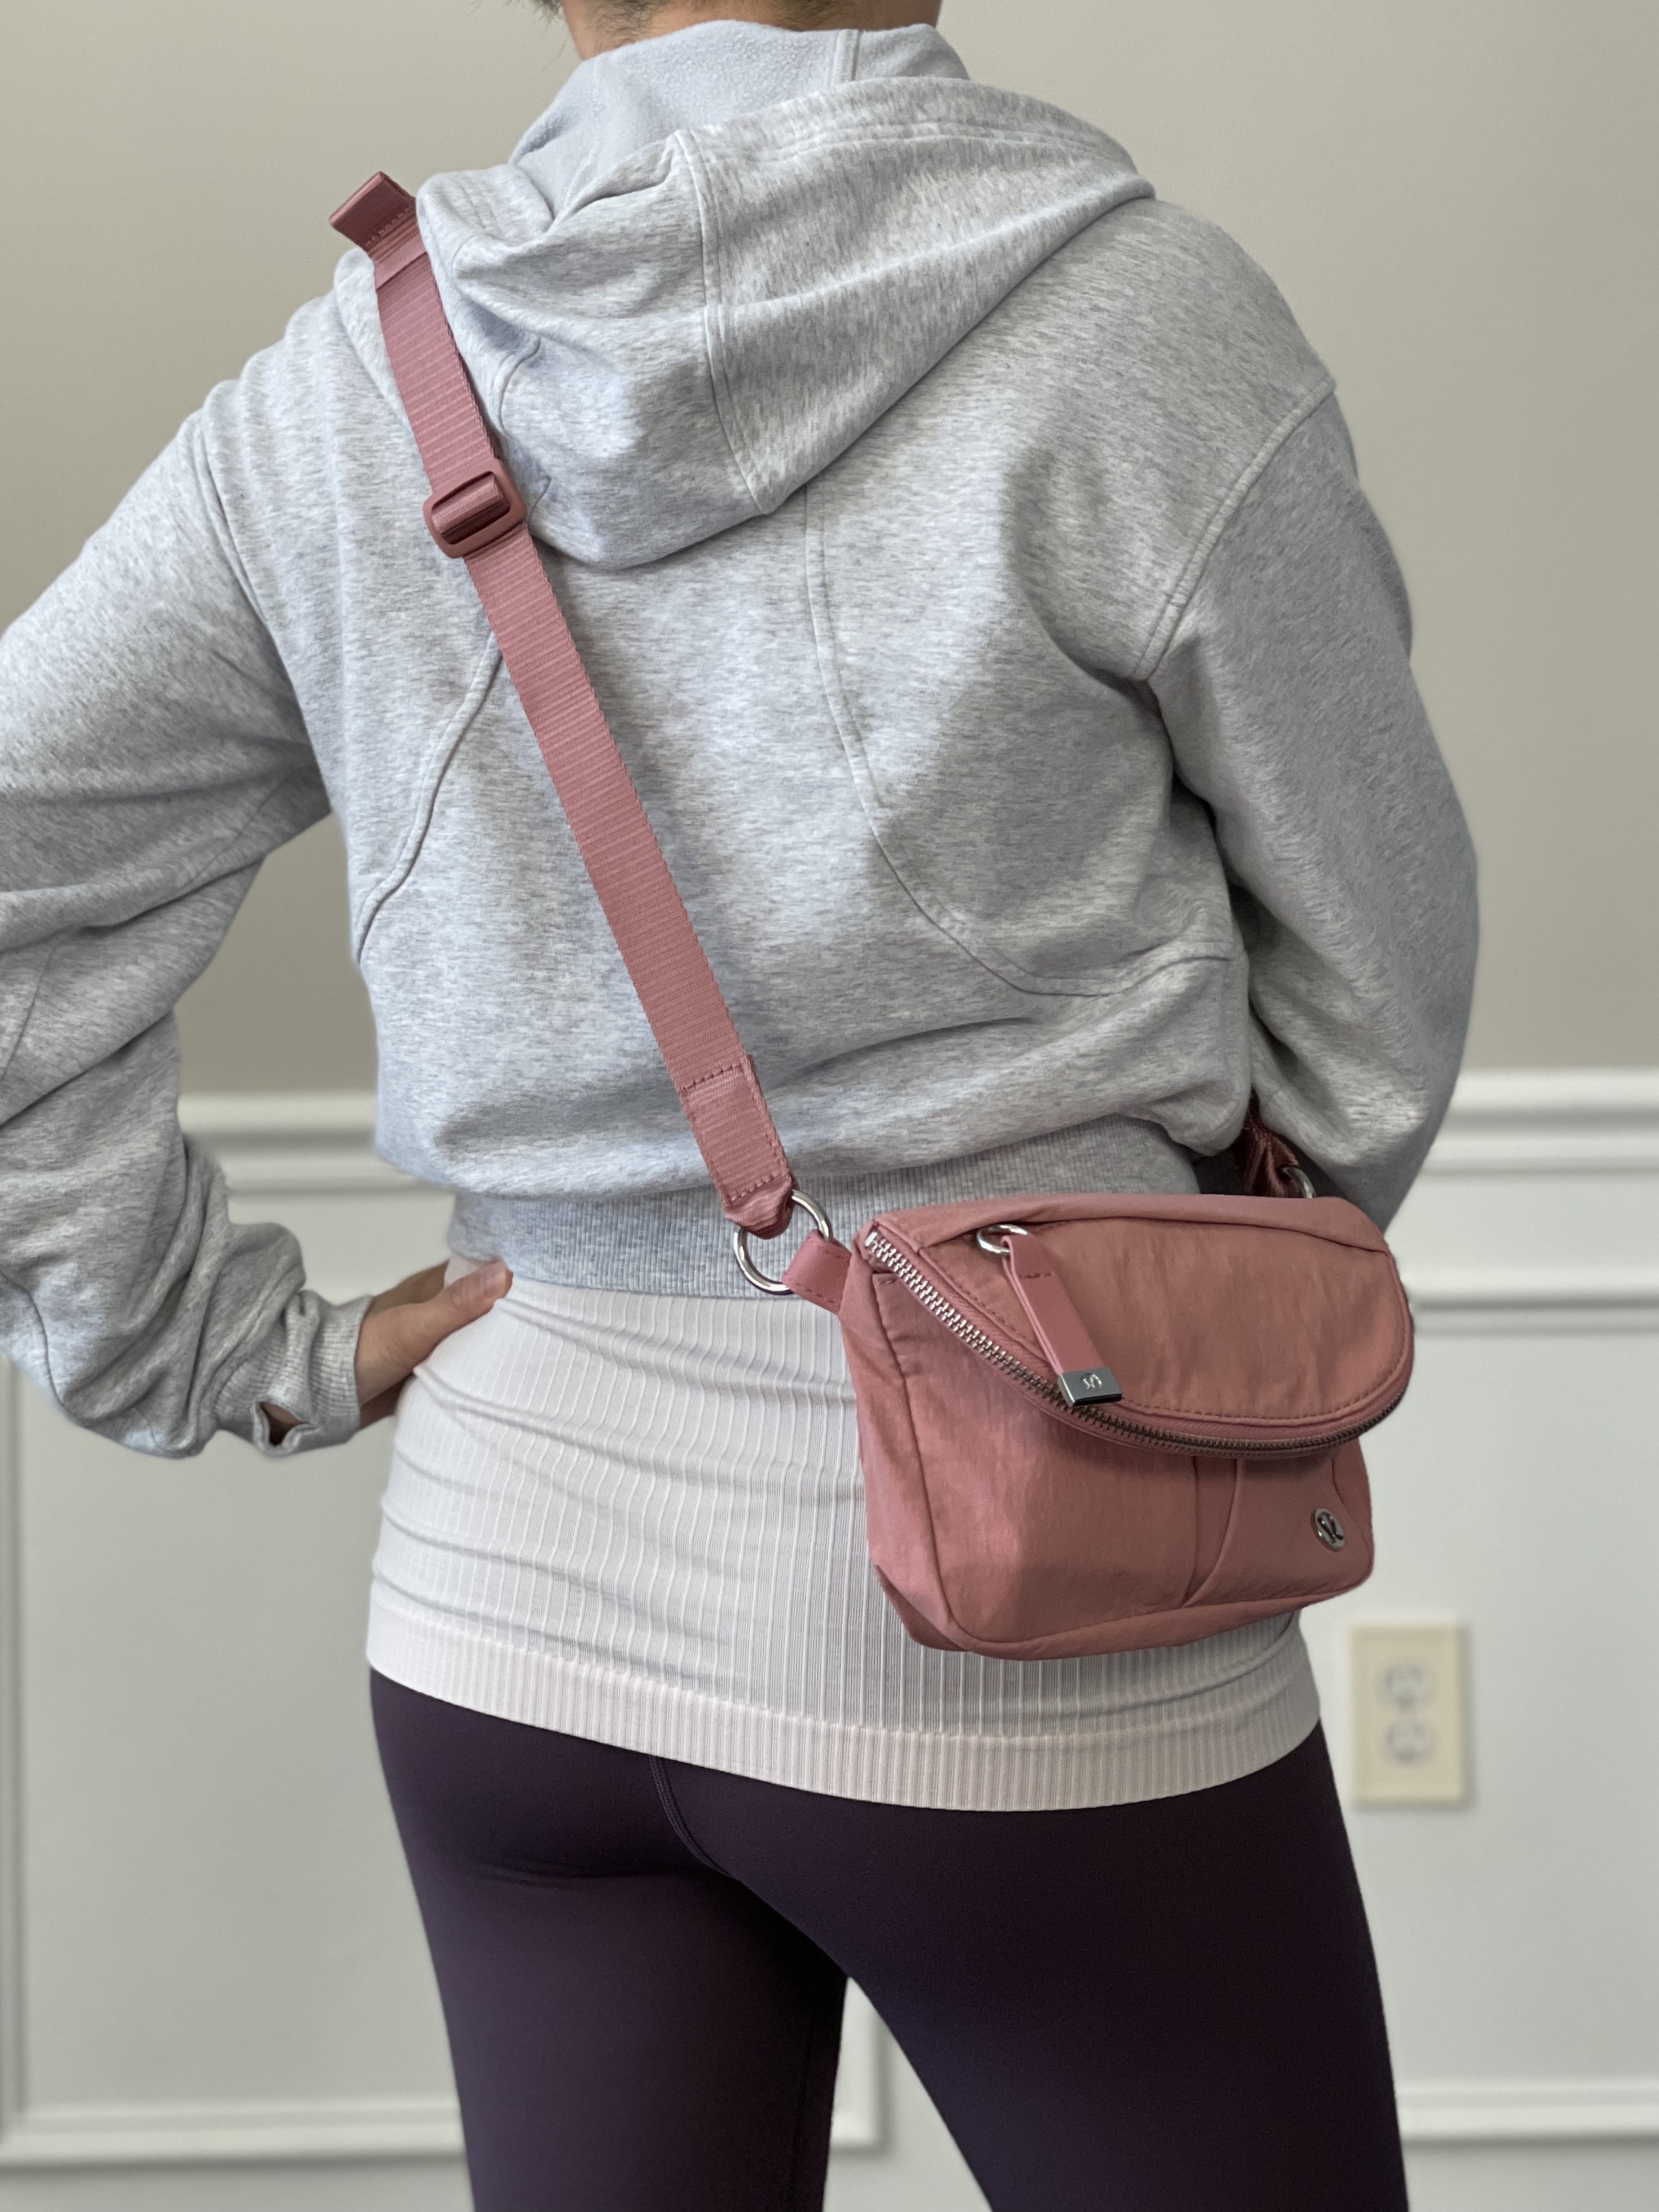 What's In My Lululemon: Micro All Night Festival Bag, 45% OFF